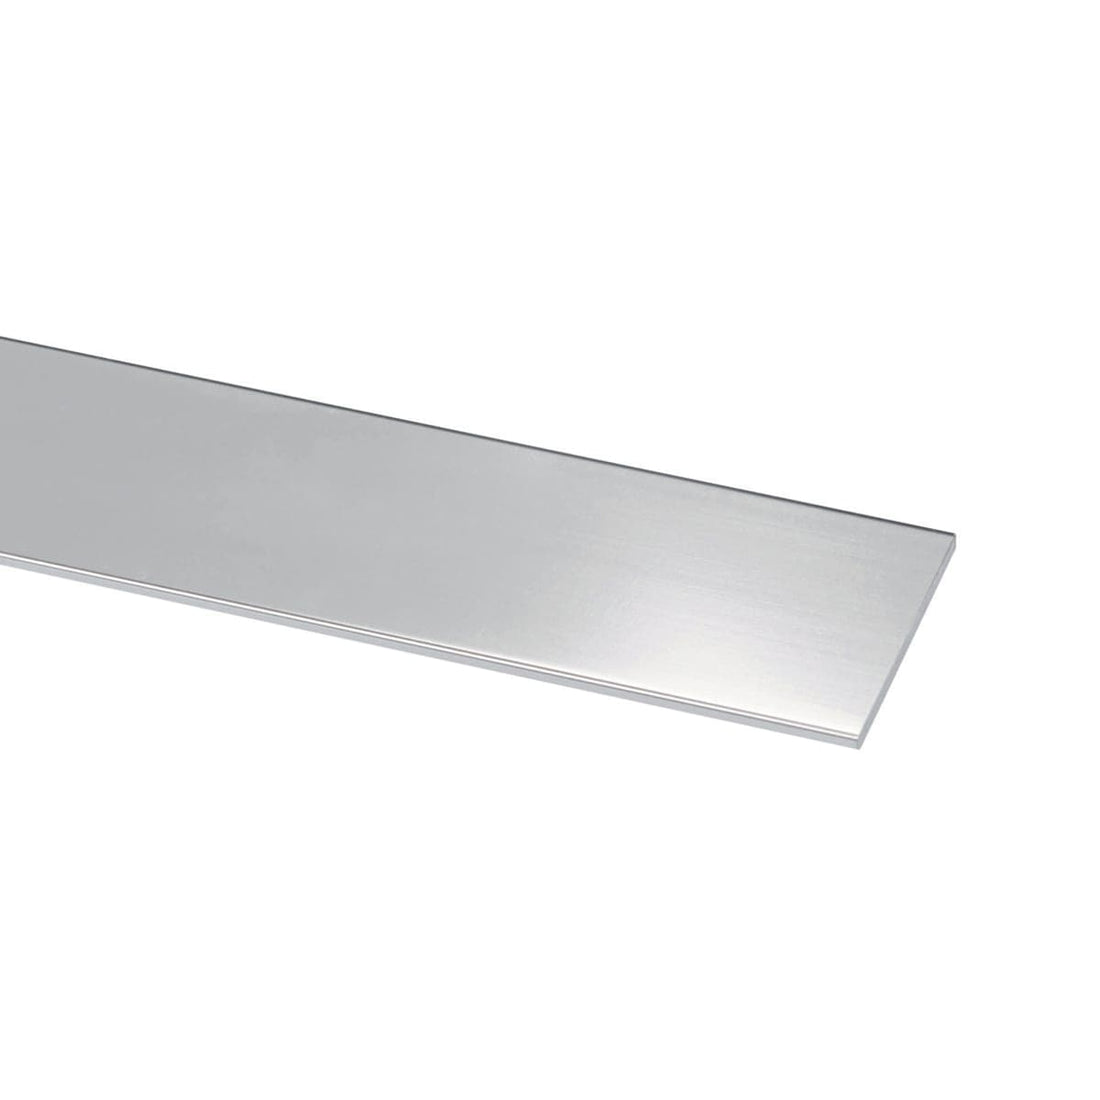 FLAT PROFILE 25X1MM 2MT STAINLESS STEEL AISI 304 - best price from Maltashopper.com BR410003771